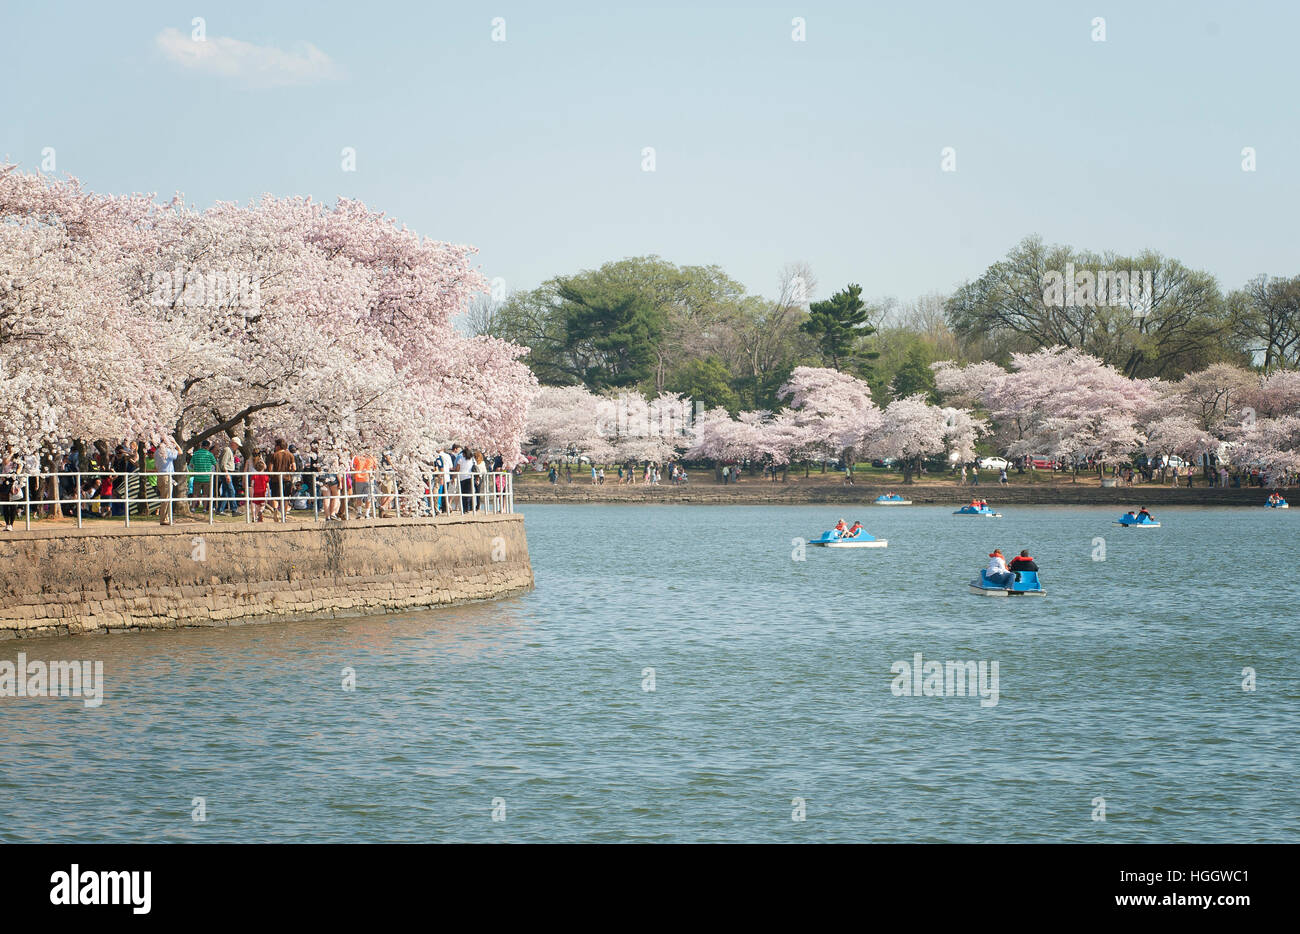 Tourists ride in paddle boats during the peak of the Cherry Blossoms n the Tidal Basin of Washington, D.C.. Stock Photo